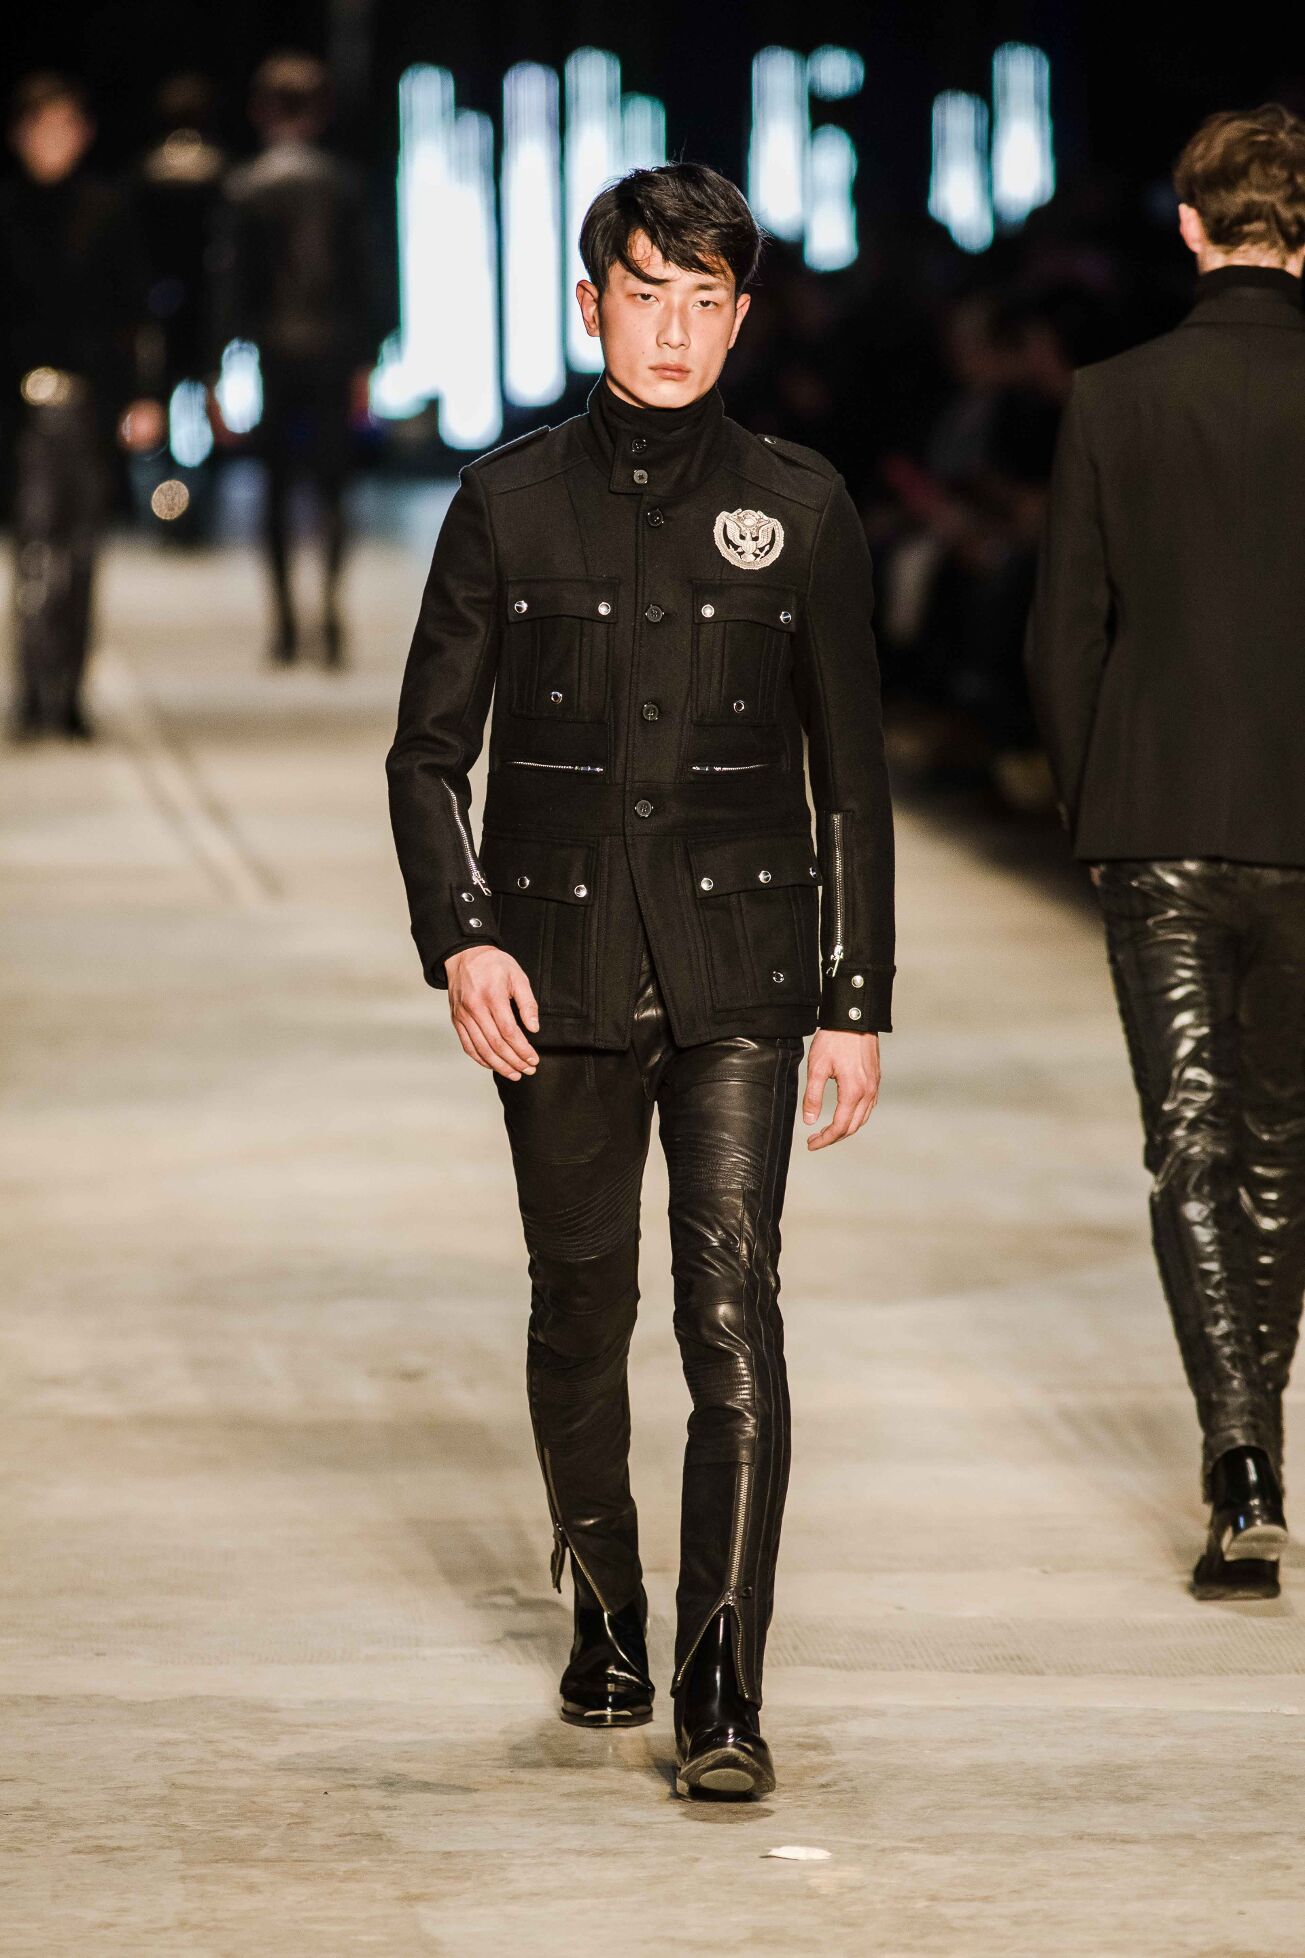 DIESEL BLACK GOLD FALL WINTER 2014 MEN'S COLLECTION - PITTI UOMO | The